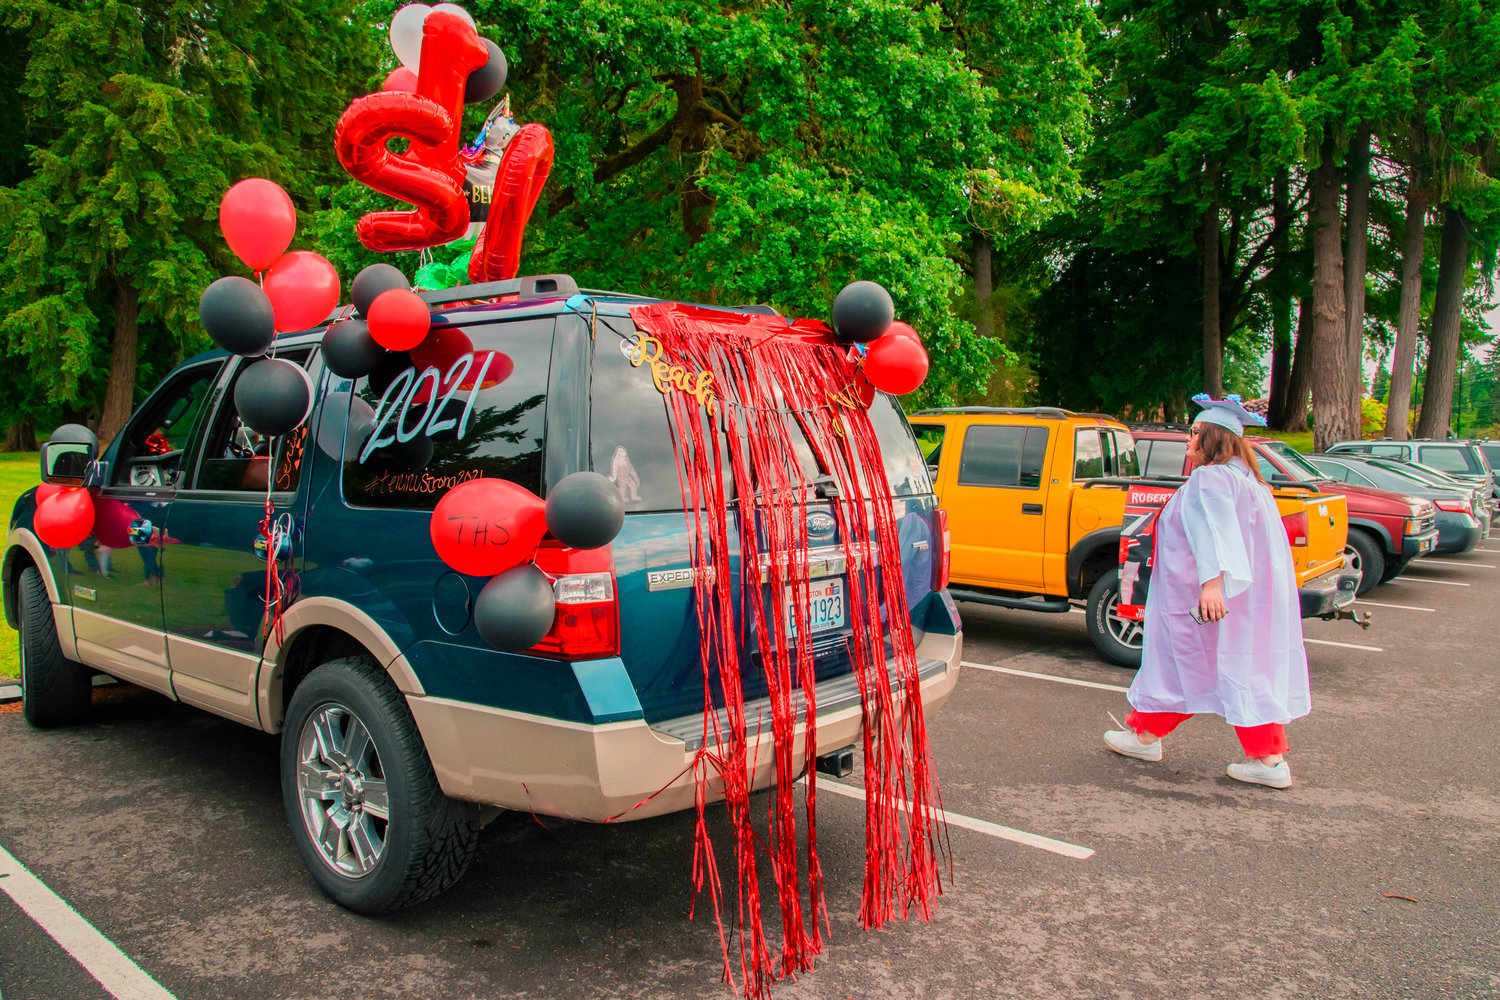 Vehichles were decorated to celebrate graduates during a parade on Friday in Tenino.